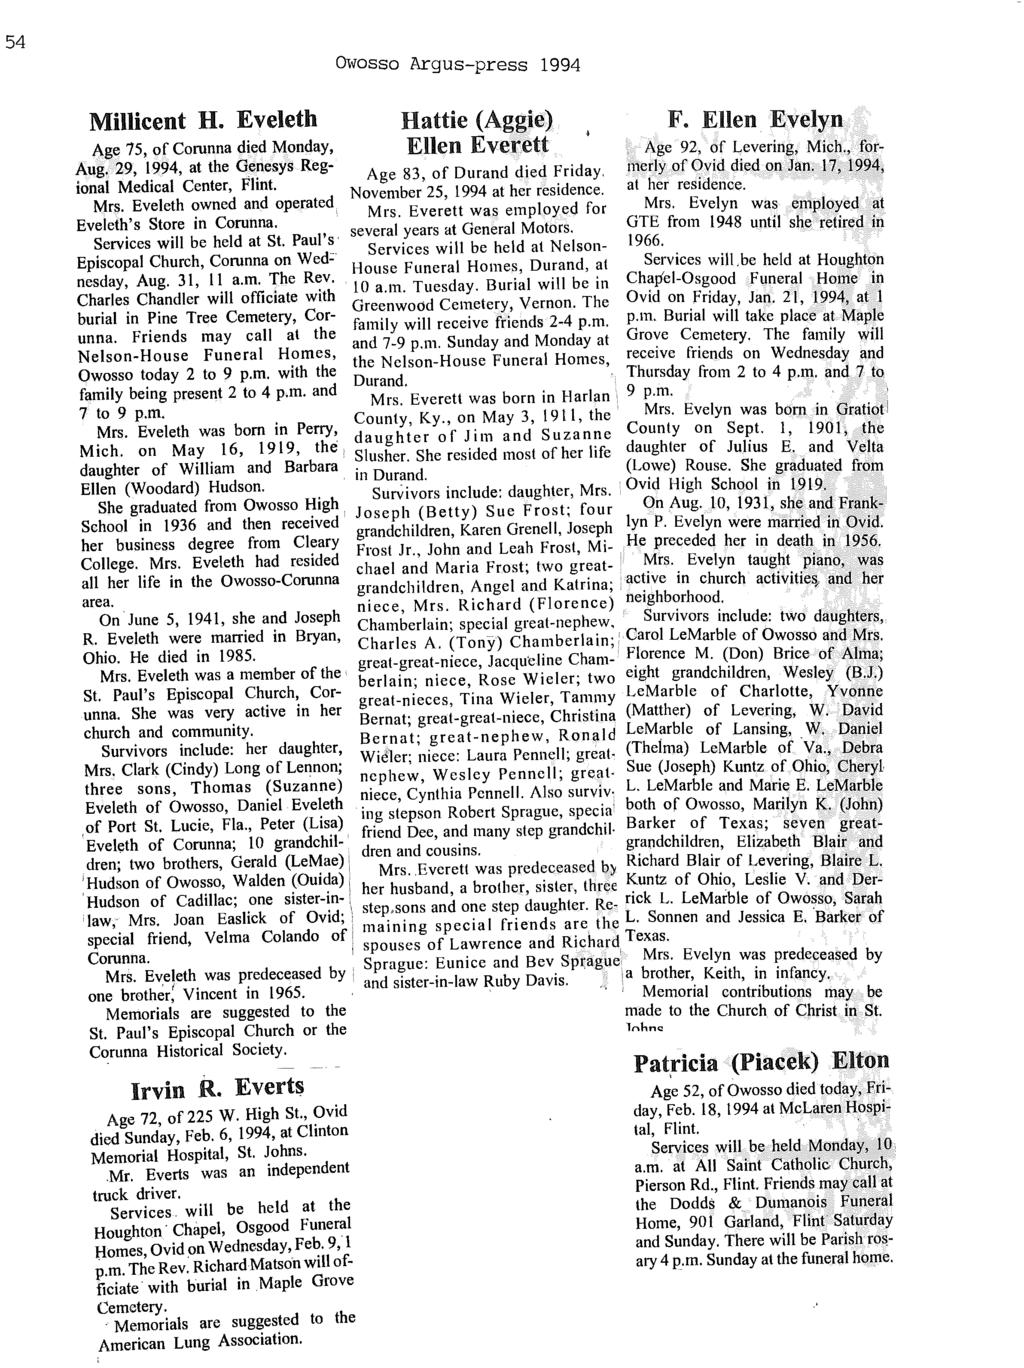 54 Owosso Argus-press 1994 Millicent H. Eveleth Hattie (Aggie) Ellen Everett F. Ellen, Evelyn one brother; Vincent in 1965. Memorials are suggested to the St.